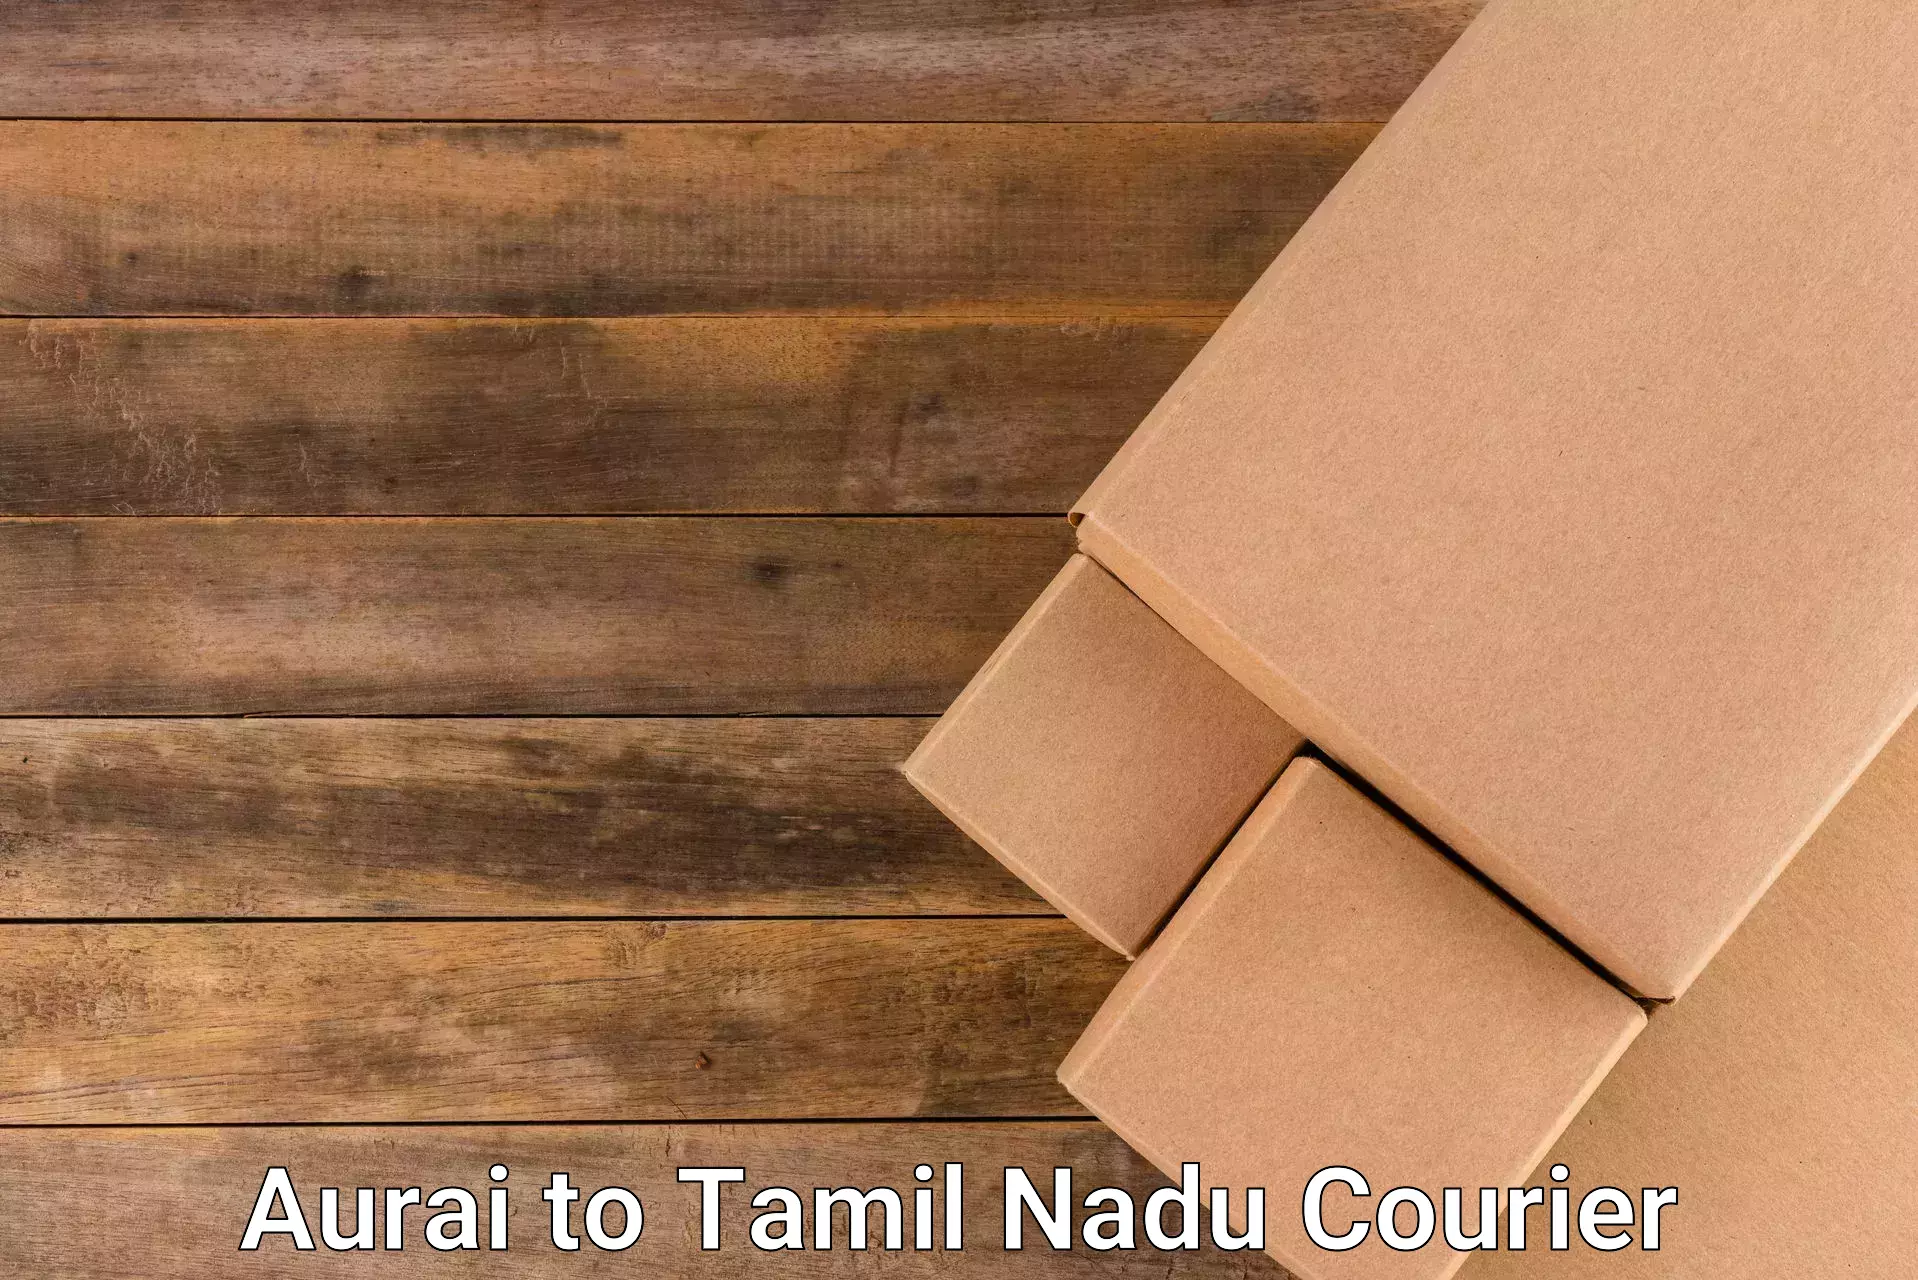 End-to-end delivery Aurai to Tamil Nadu